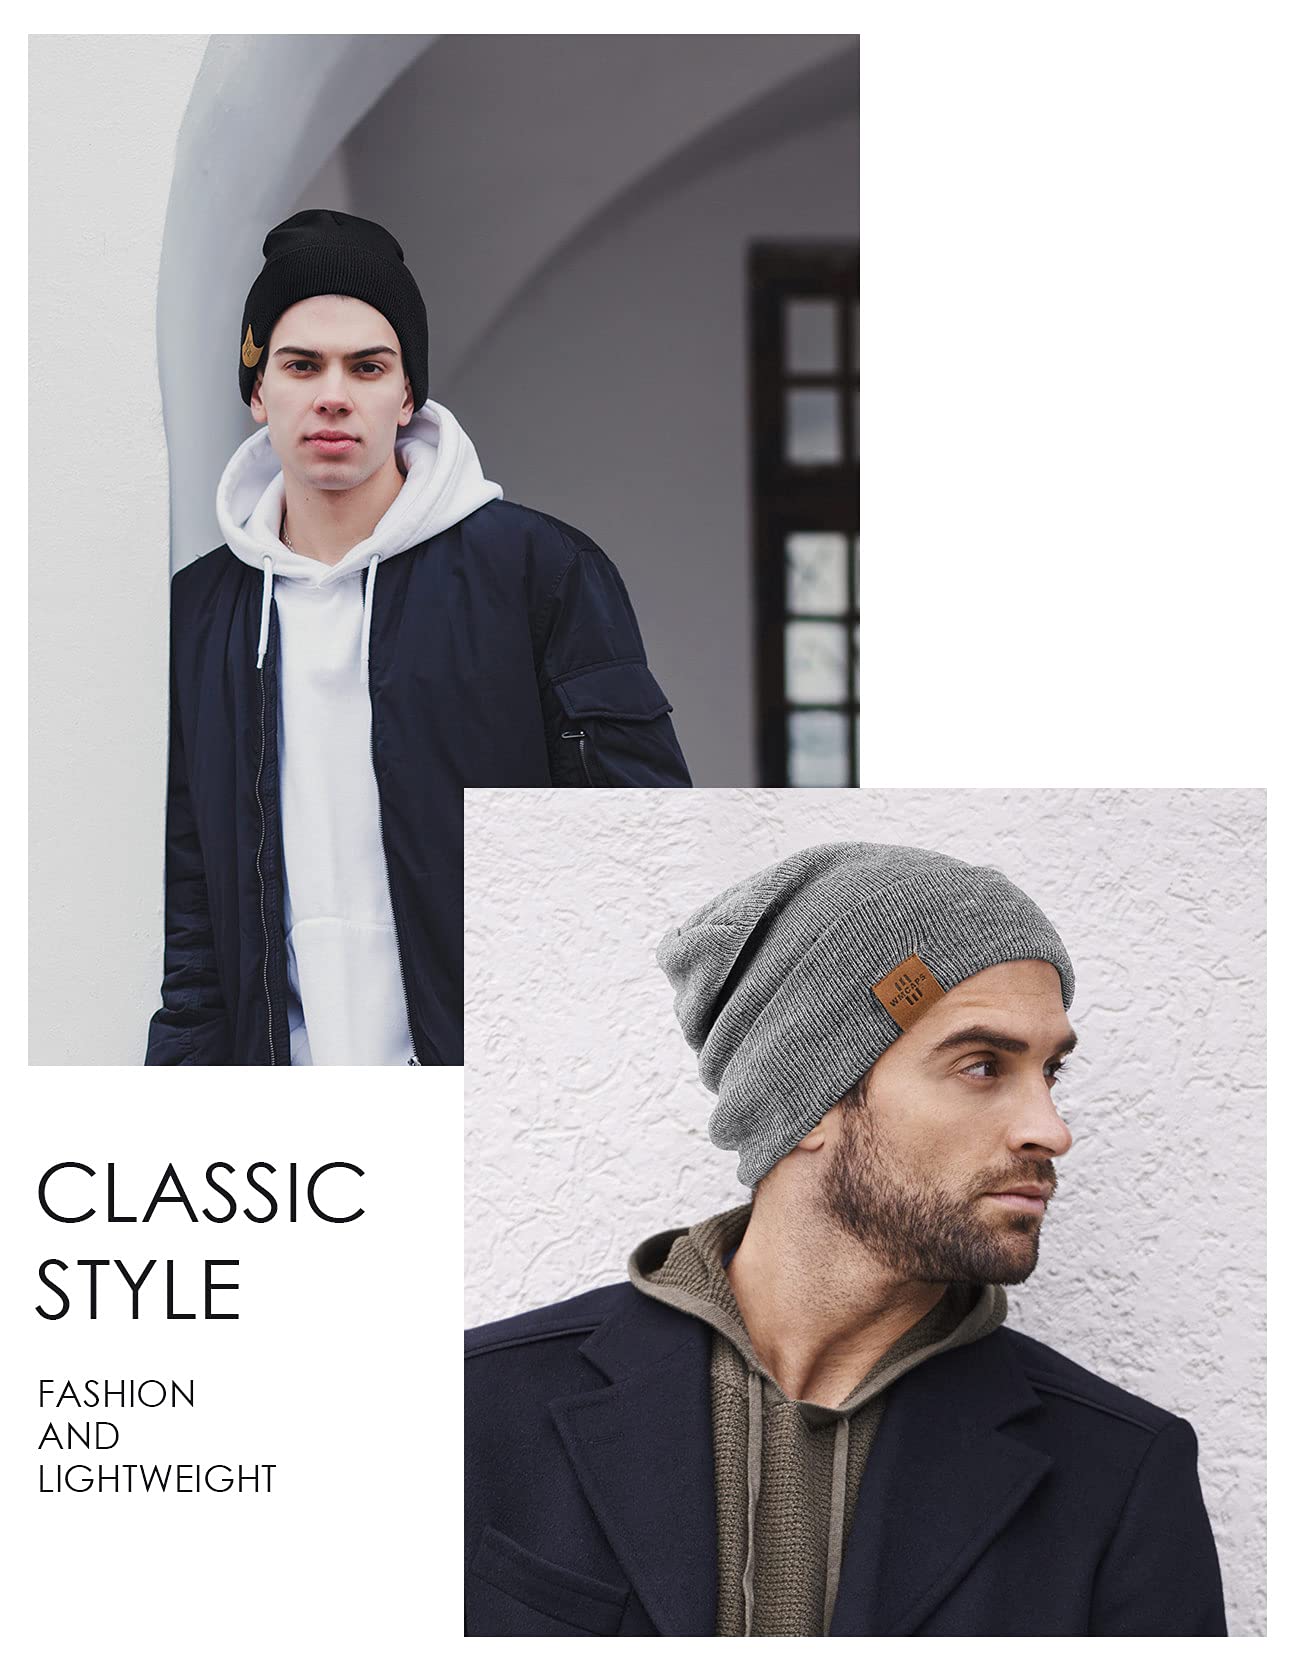 Beanie for Men, Comfortable Breathable Soft Beanie, Fashion Winter Hats for Women and Men, Gifts for Him/Her Light Grey